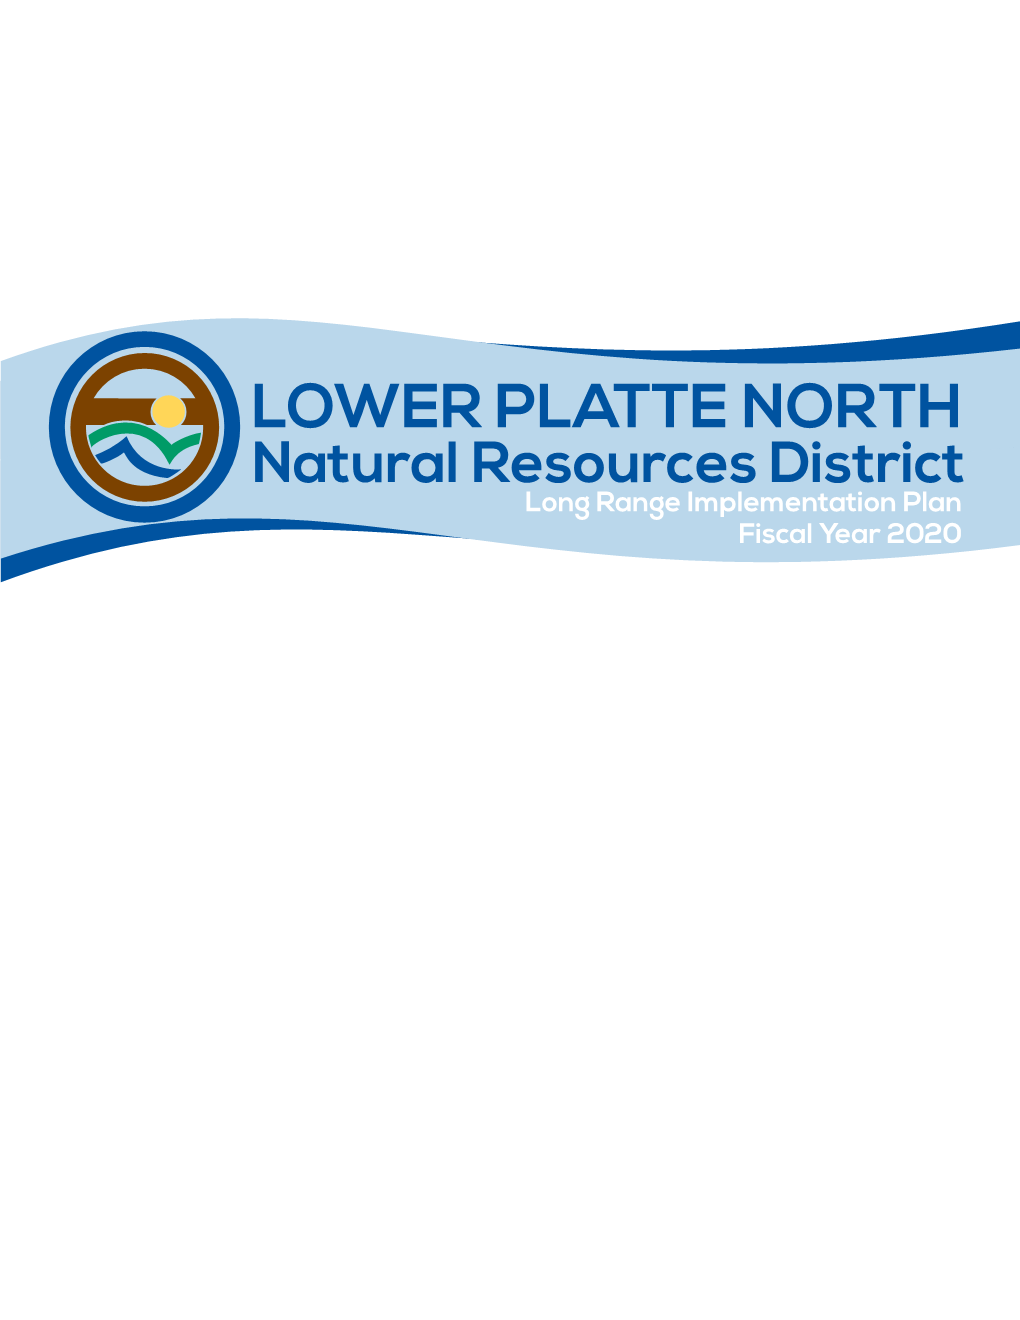 LOWER PLATTE NORTH Natural Resources District Long Range Implementation Plan Fiscal Year 2020